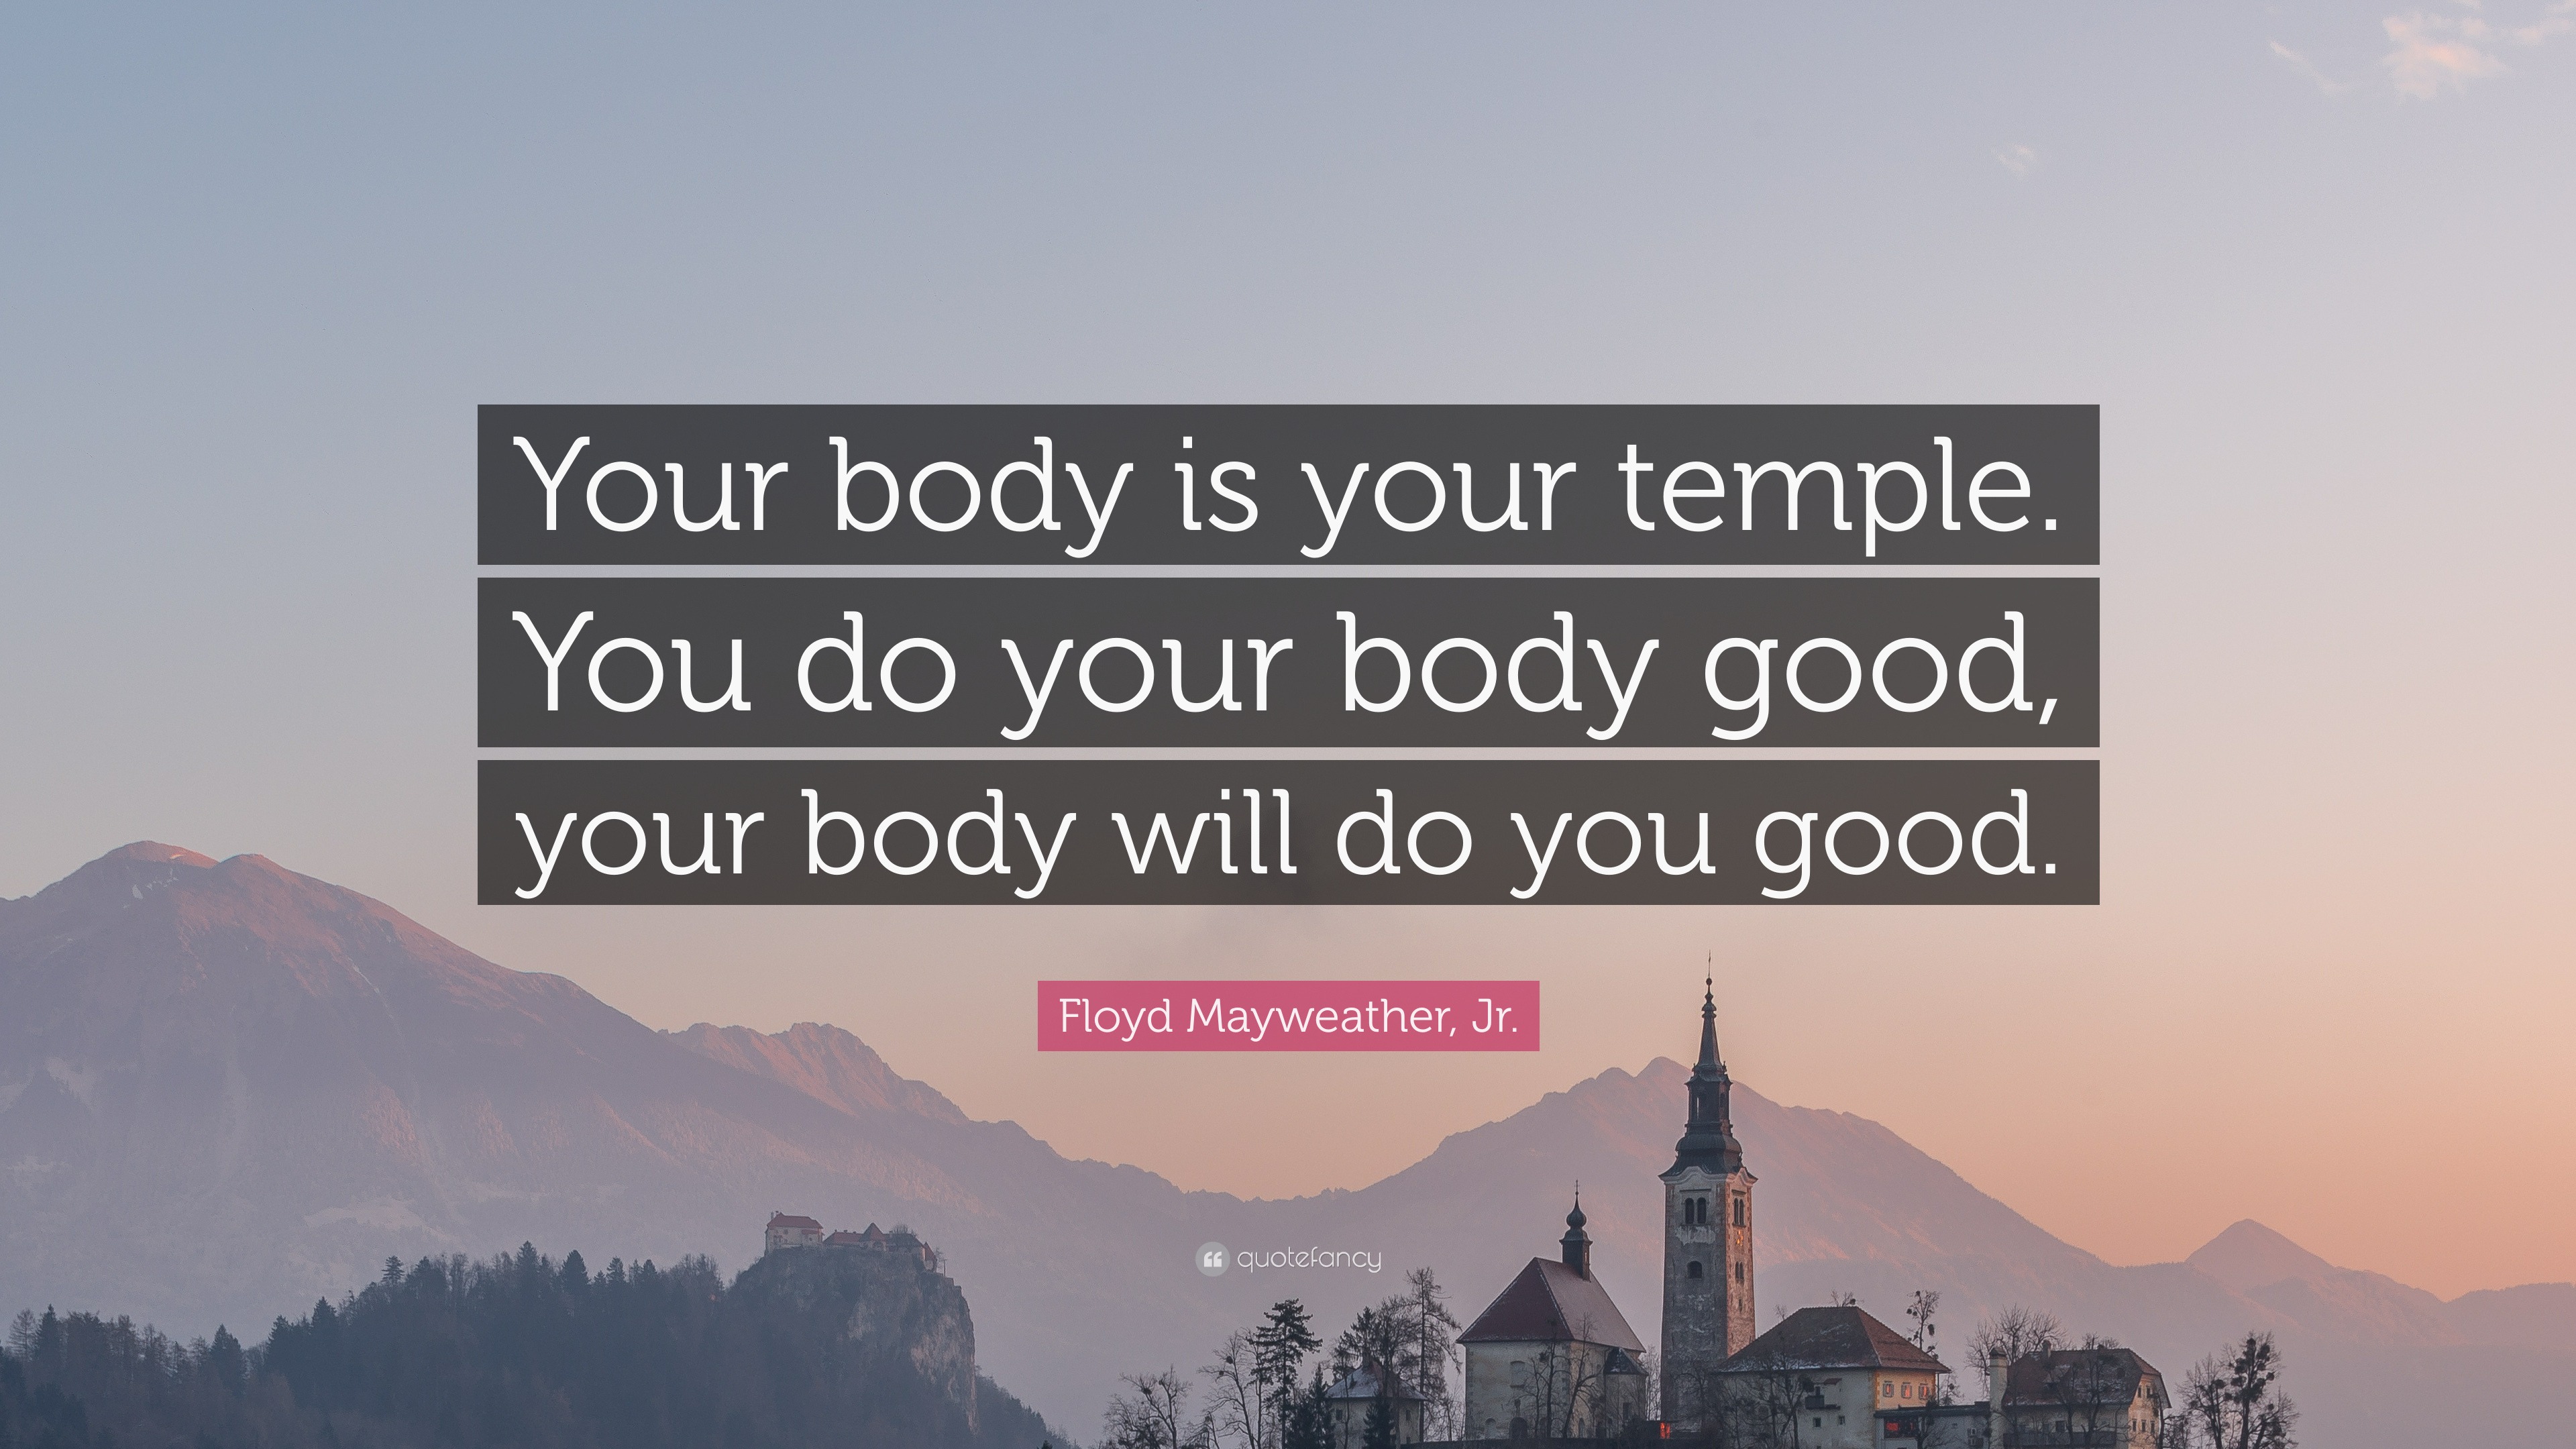 Floyd Mayweather, Jr. Quote: “Your body is your temple. You do your